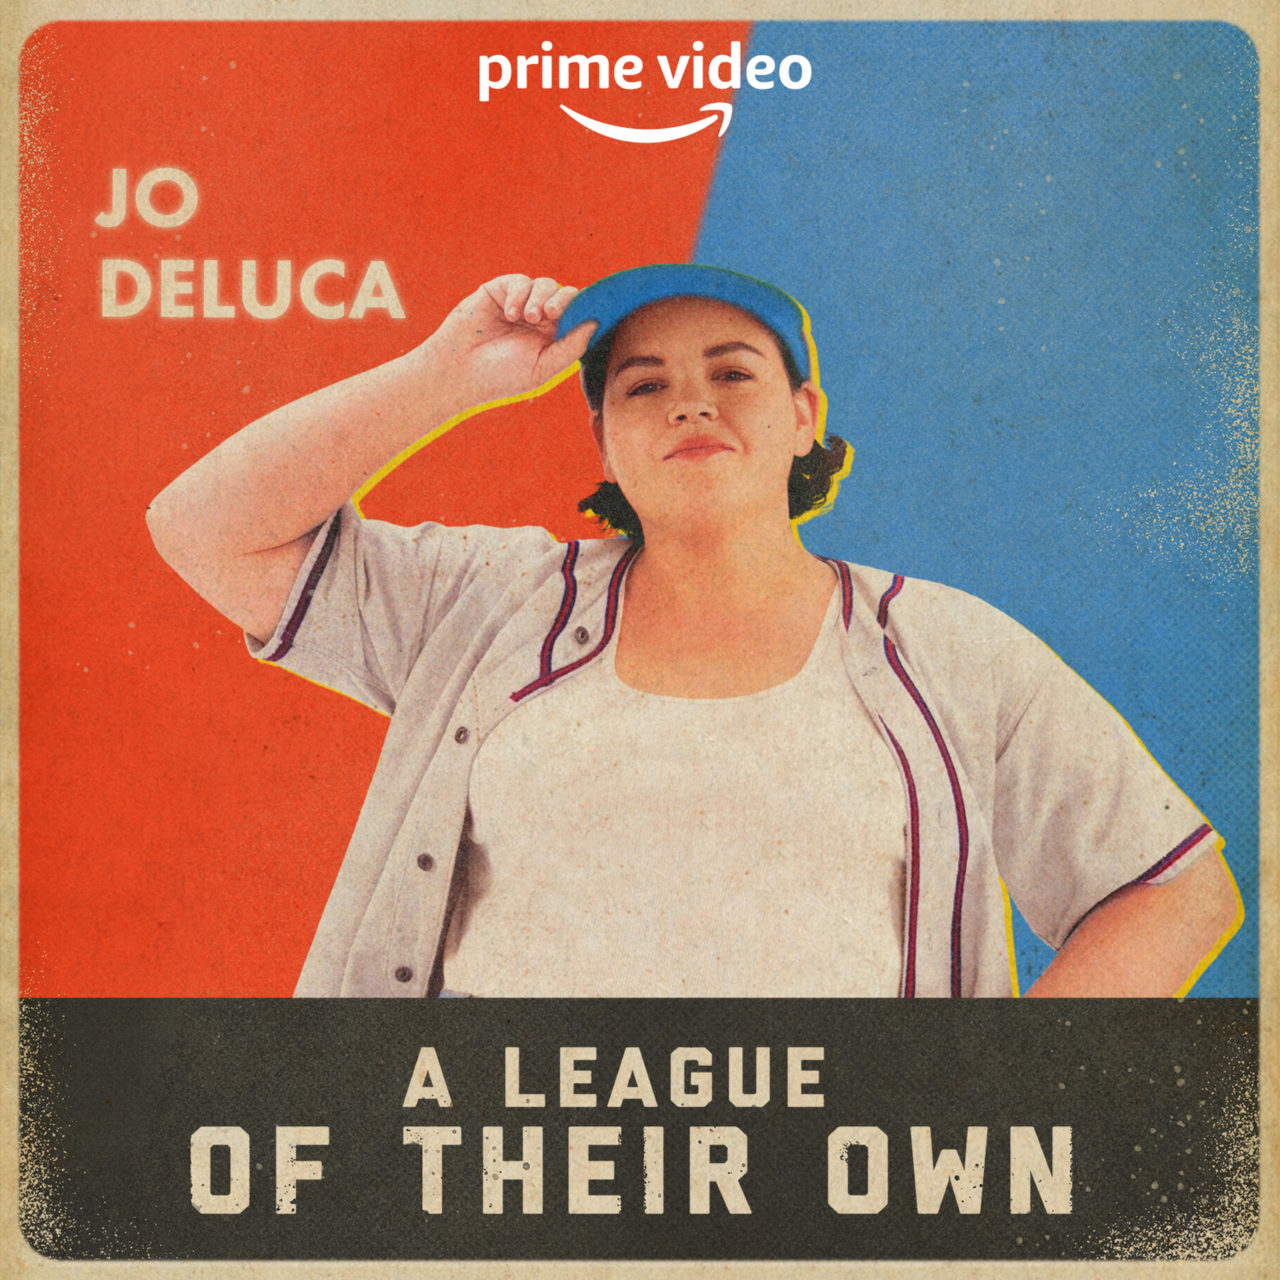 A League Of Their Own character poster (Prime Video/Sony Pictures Television)